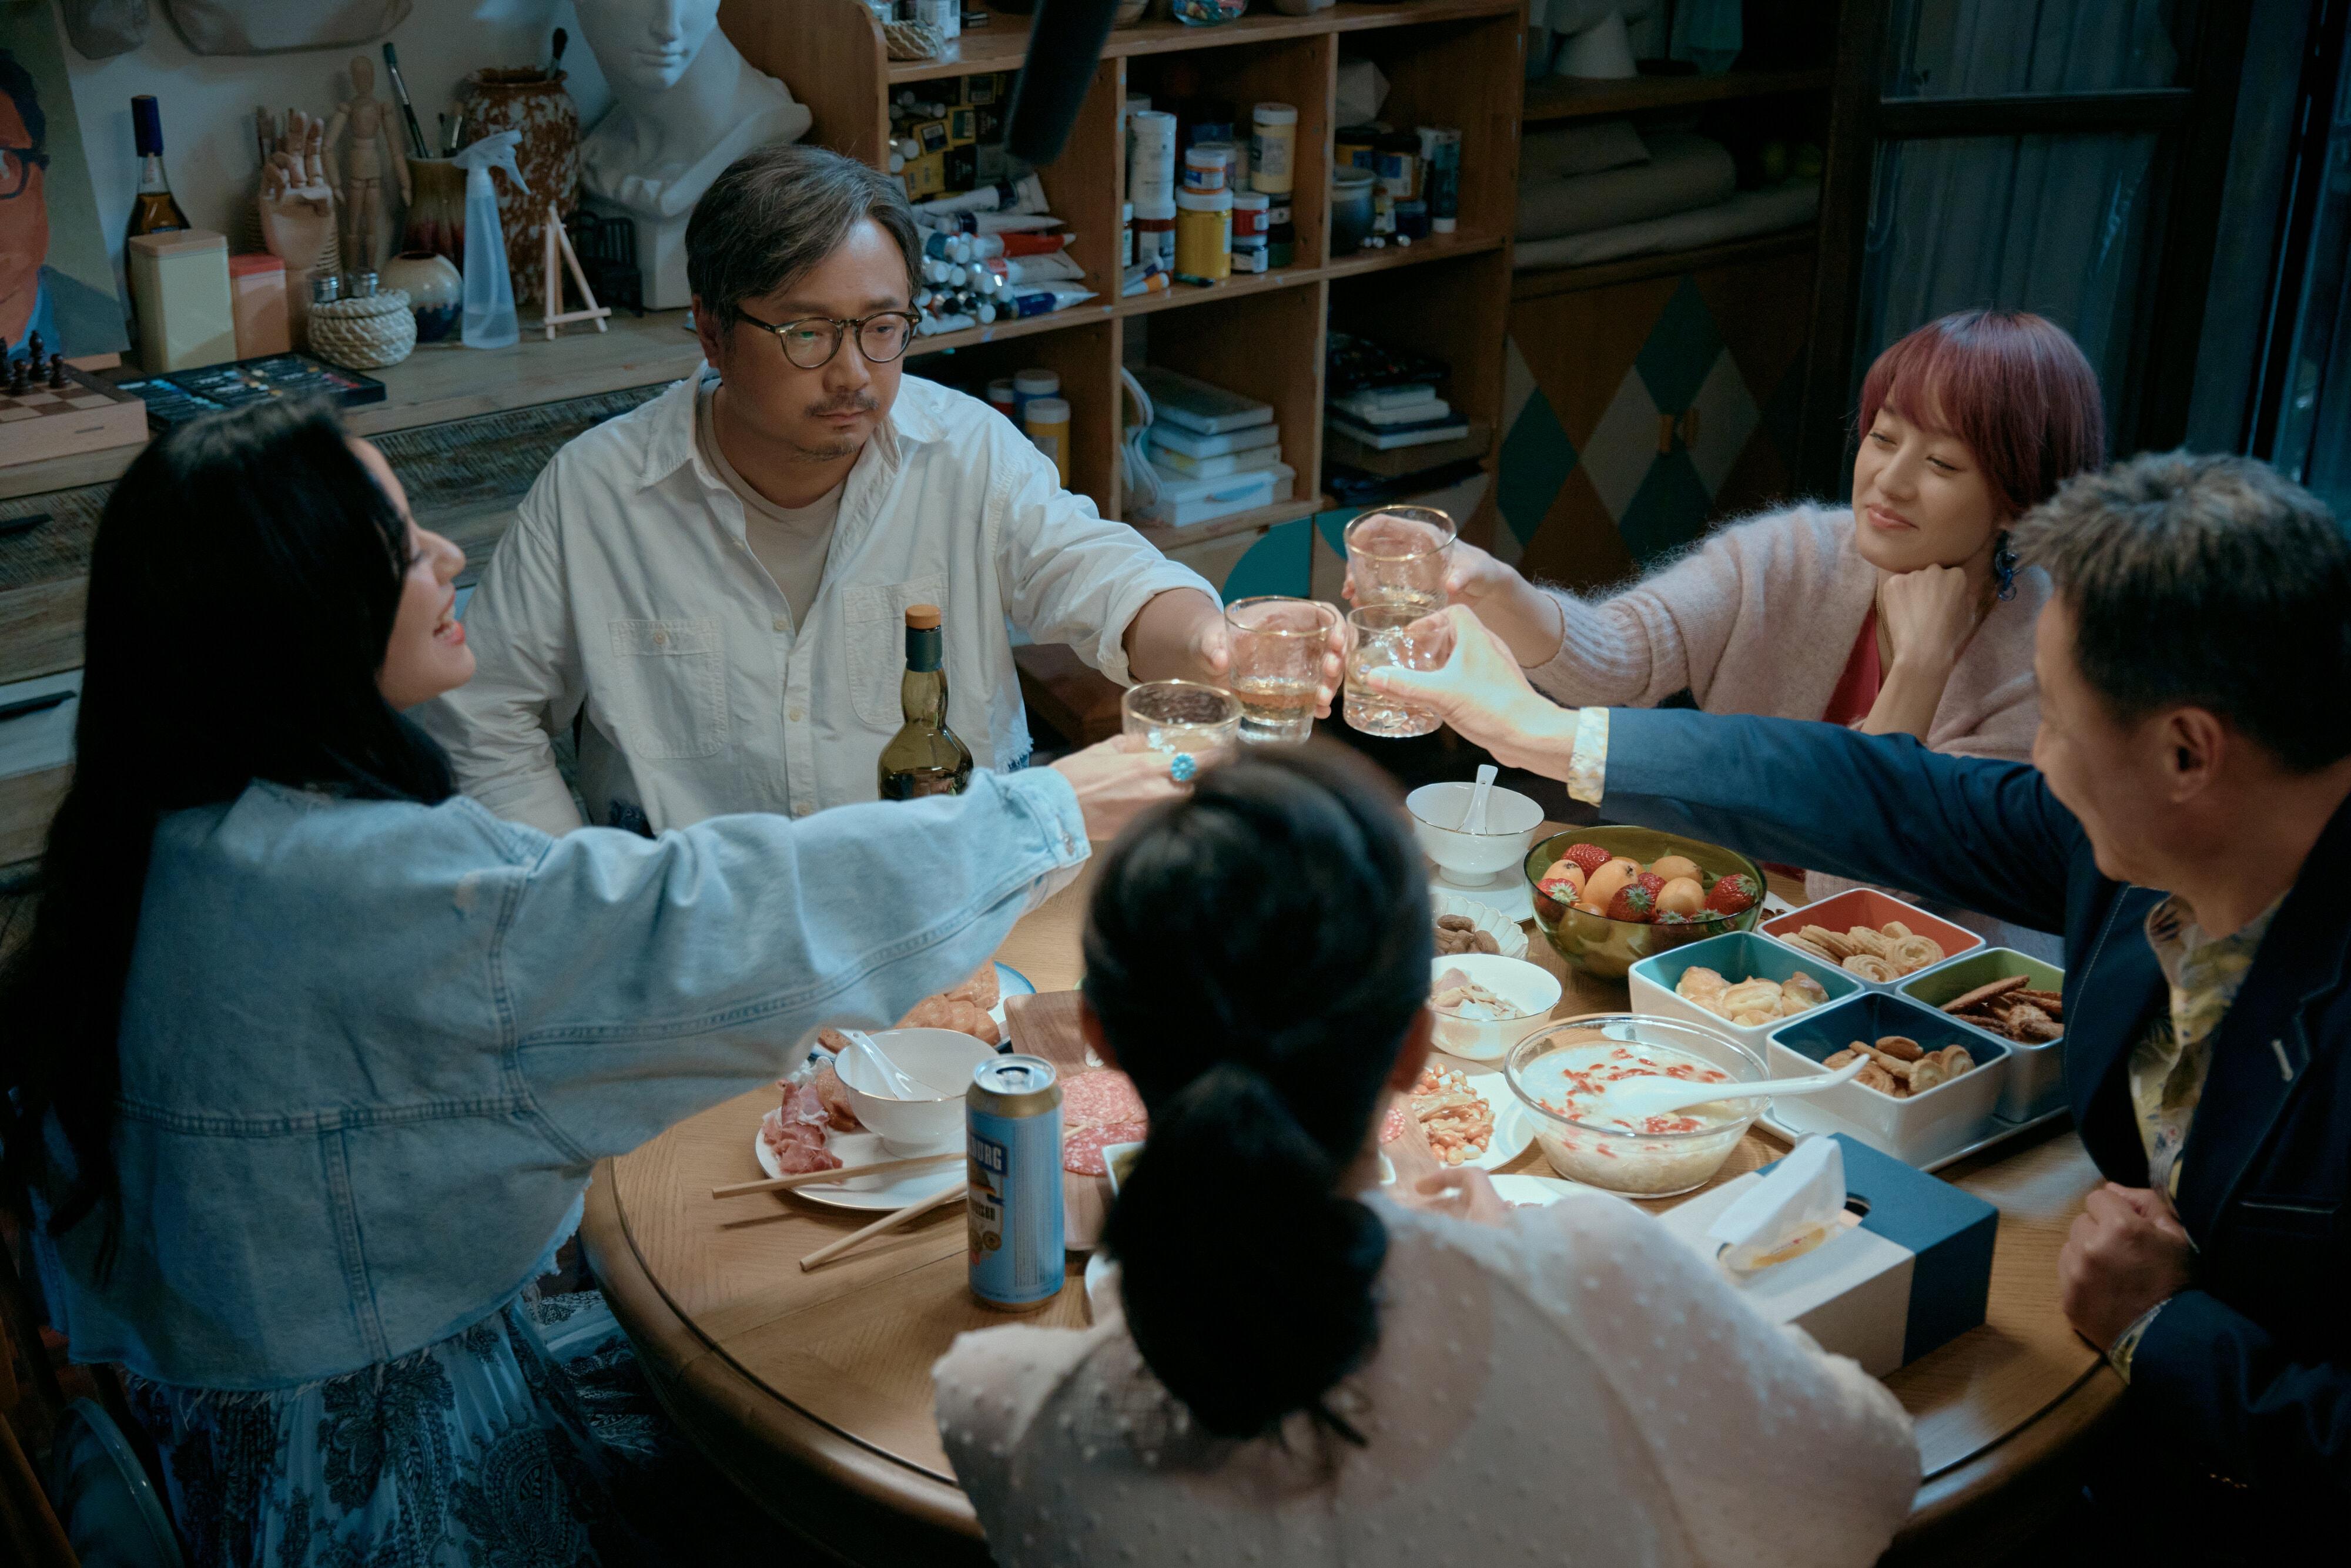 Jointly presented by the Leisure and Cultural Services Department and the South China Film Industry Workers Union, Chinese Film Panorama 2022 will be held from October 18 to November 26, screening 10 distinguished comedies produced in the Mainland. Photo shows a film still of "B for Busy" (2021).
